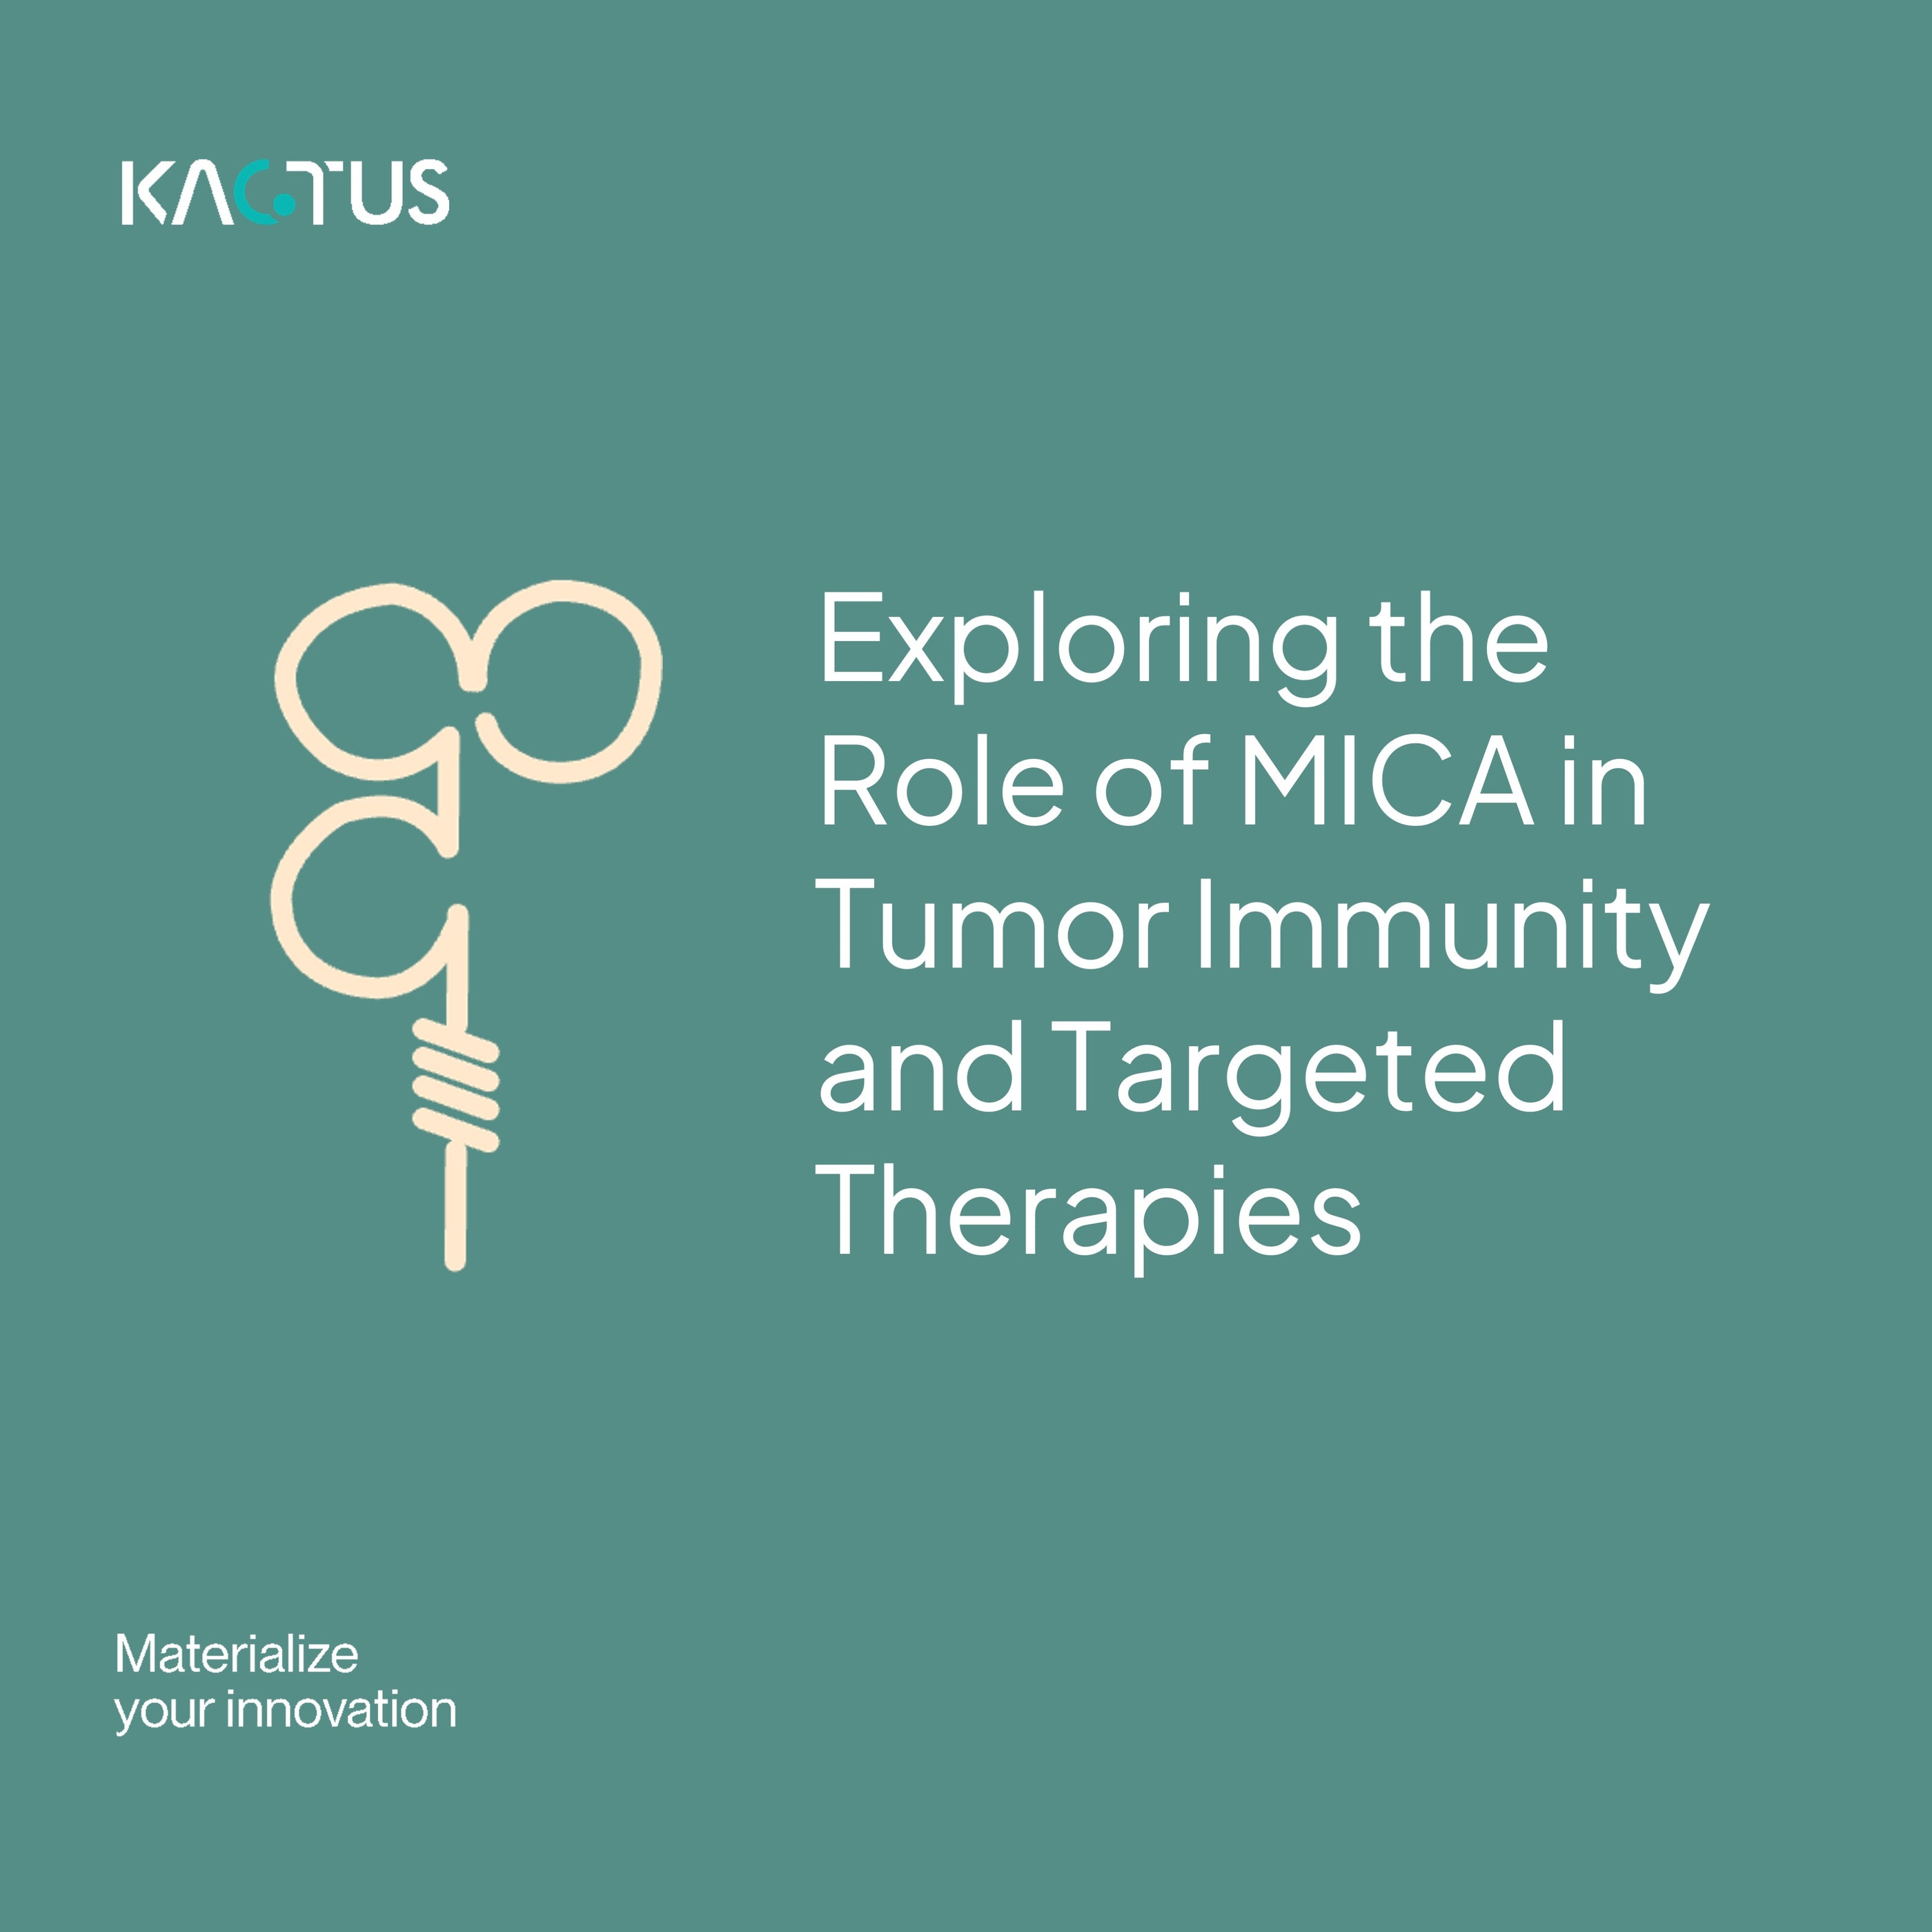 Exploring the Role of MICA in Tumor Immunity and Targeted Therapies